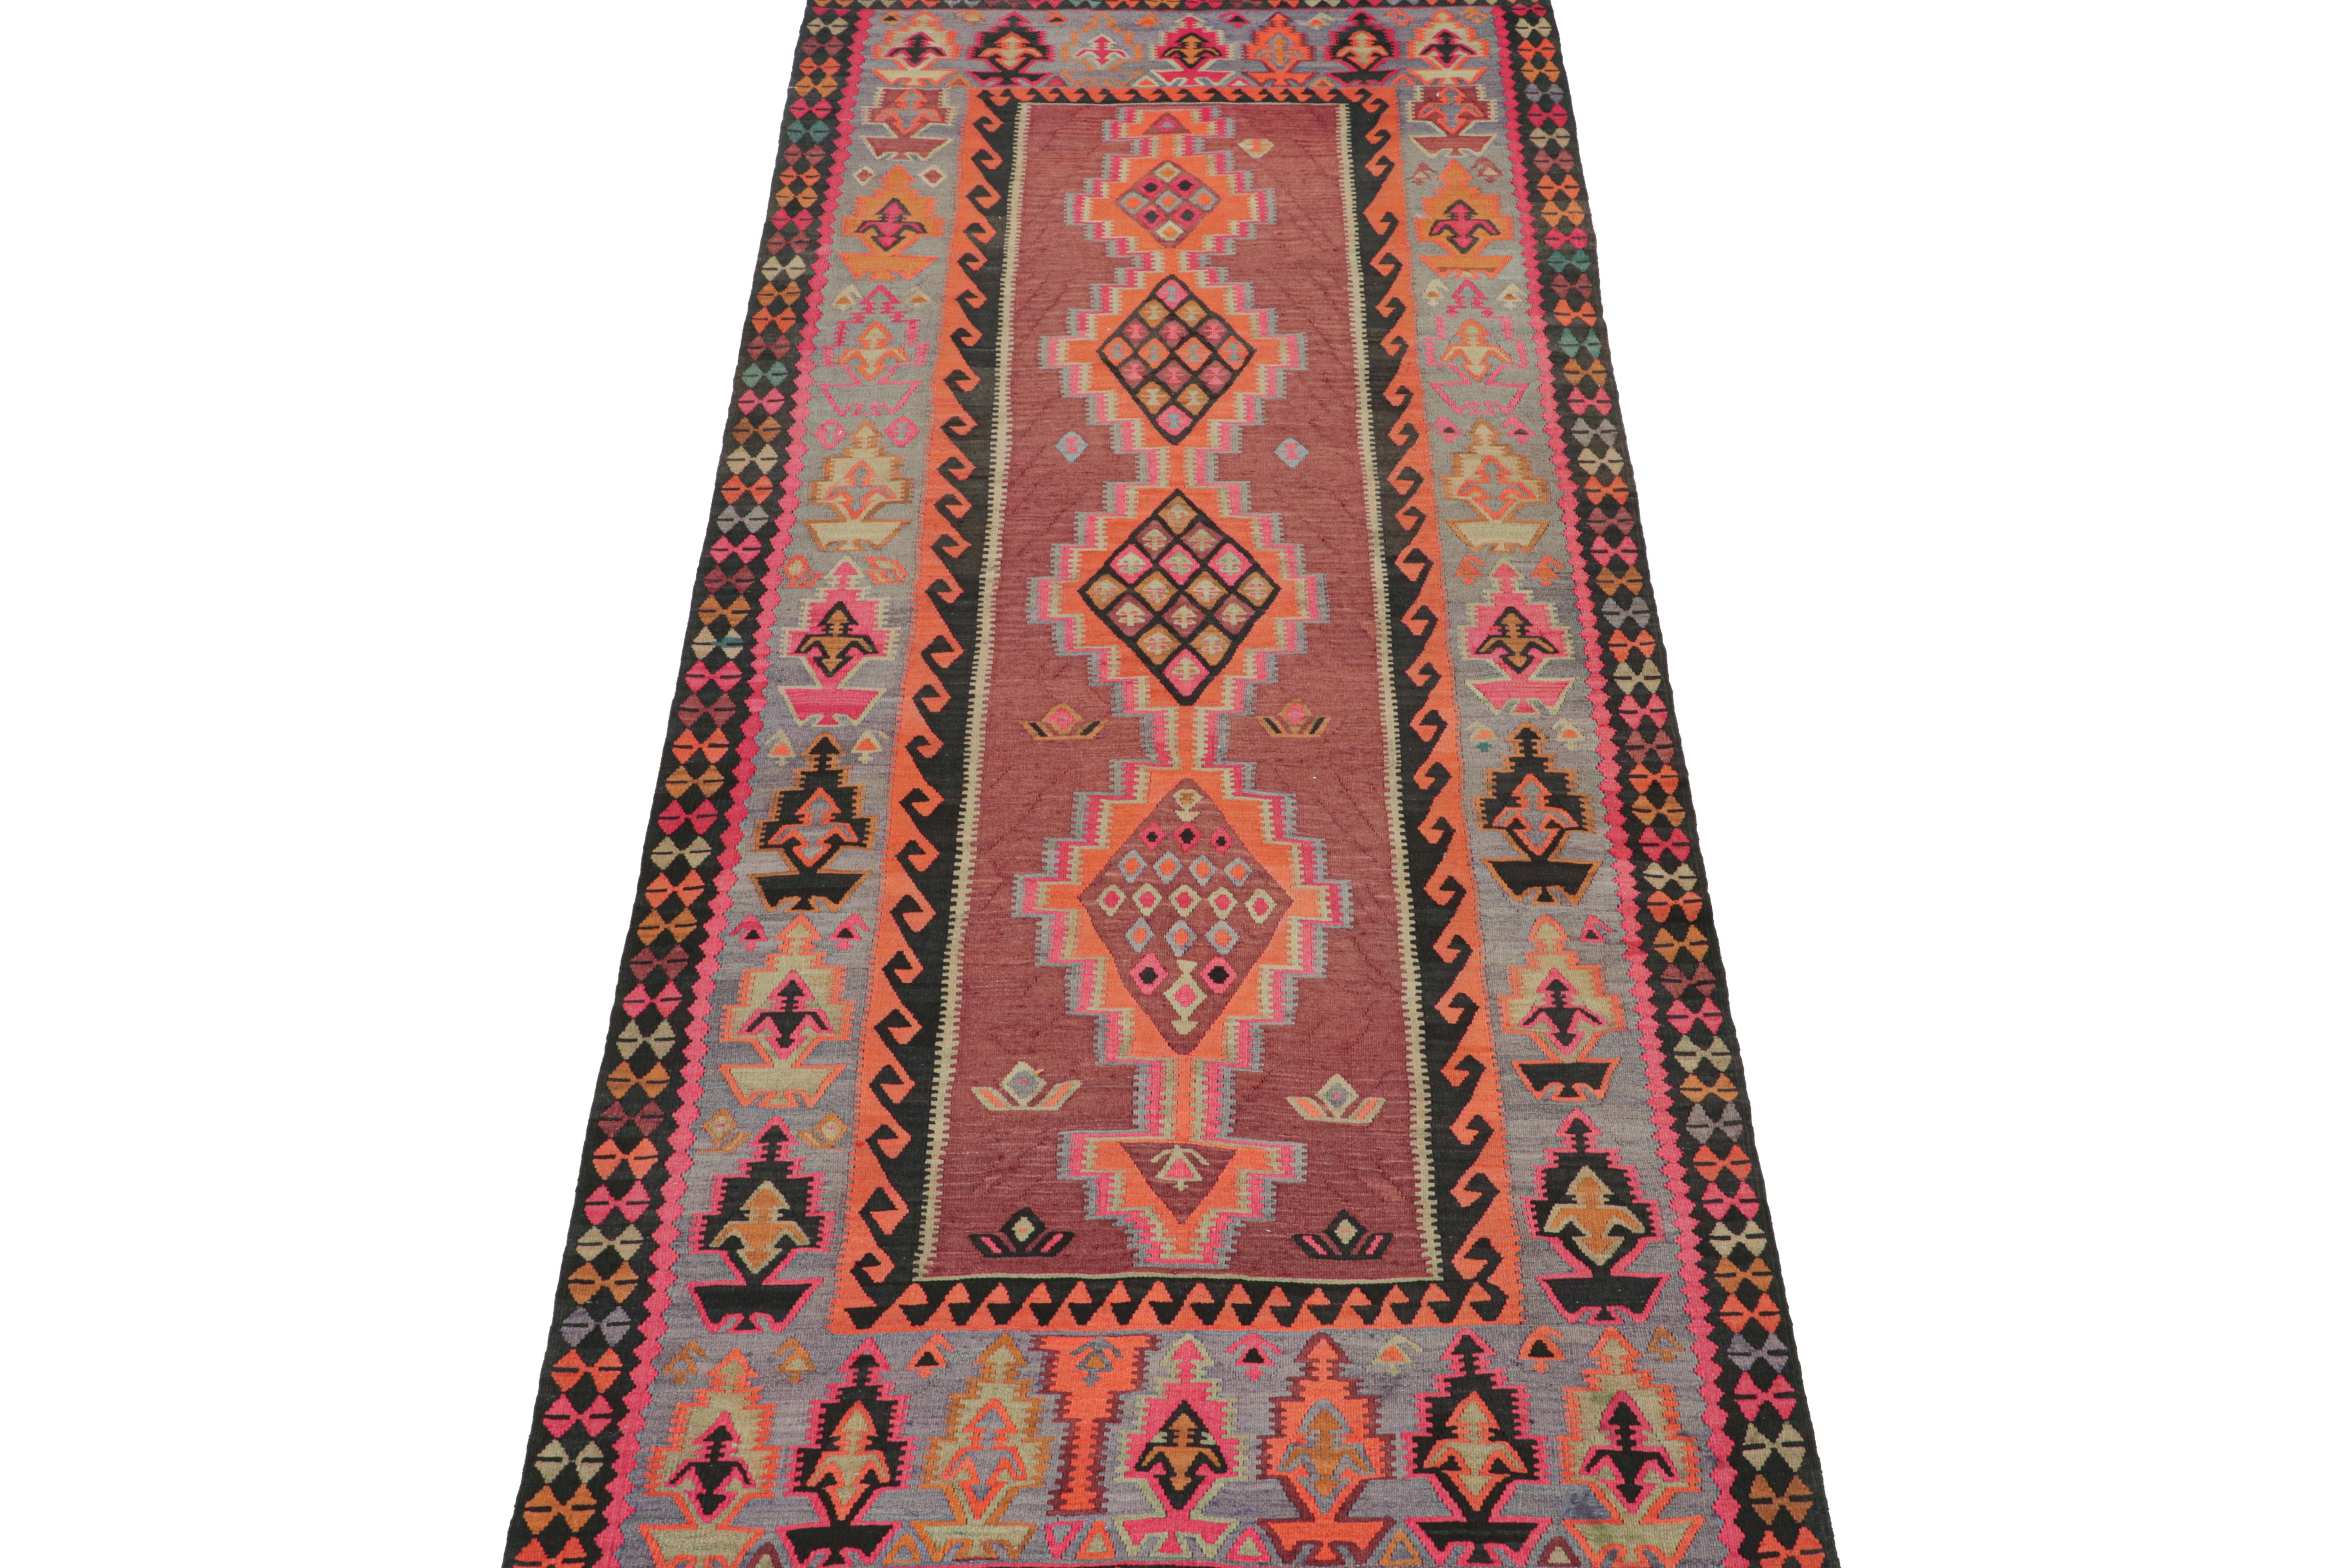 This vintage 5x12 Persian Kilim is a tribal rug from Meshkin—a small northwestern village known for its fabulous works. Handwoven in wool, it originates circa 1950-1960.

Further on the Design:

The bold design prefers medallion patterns in